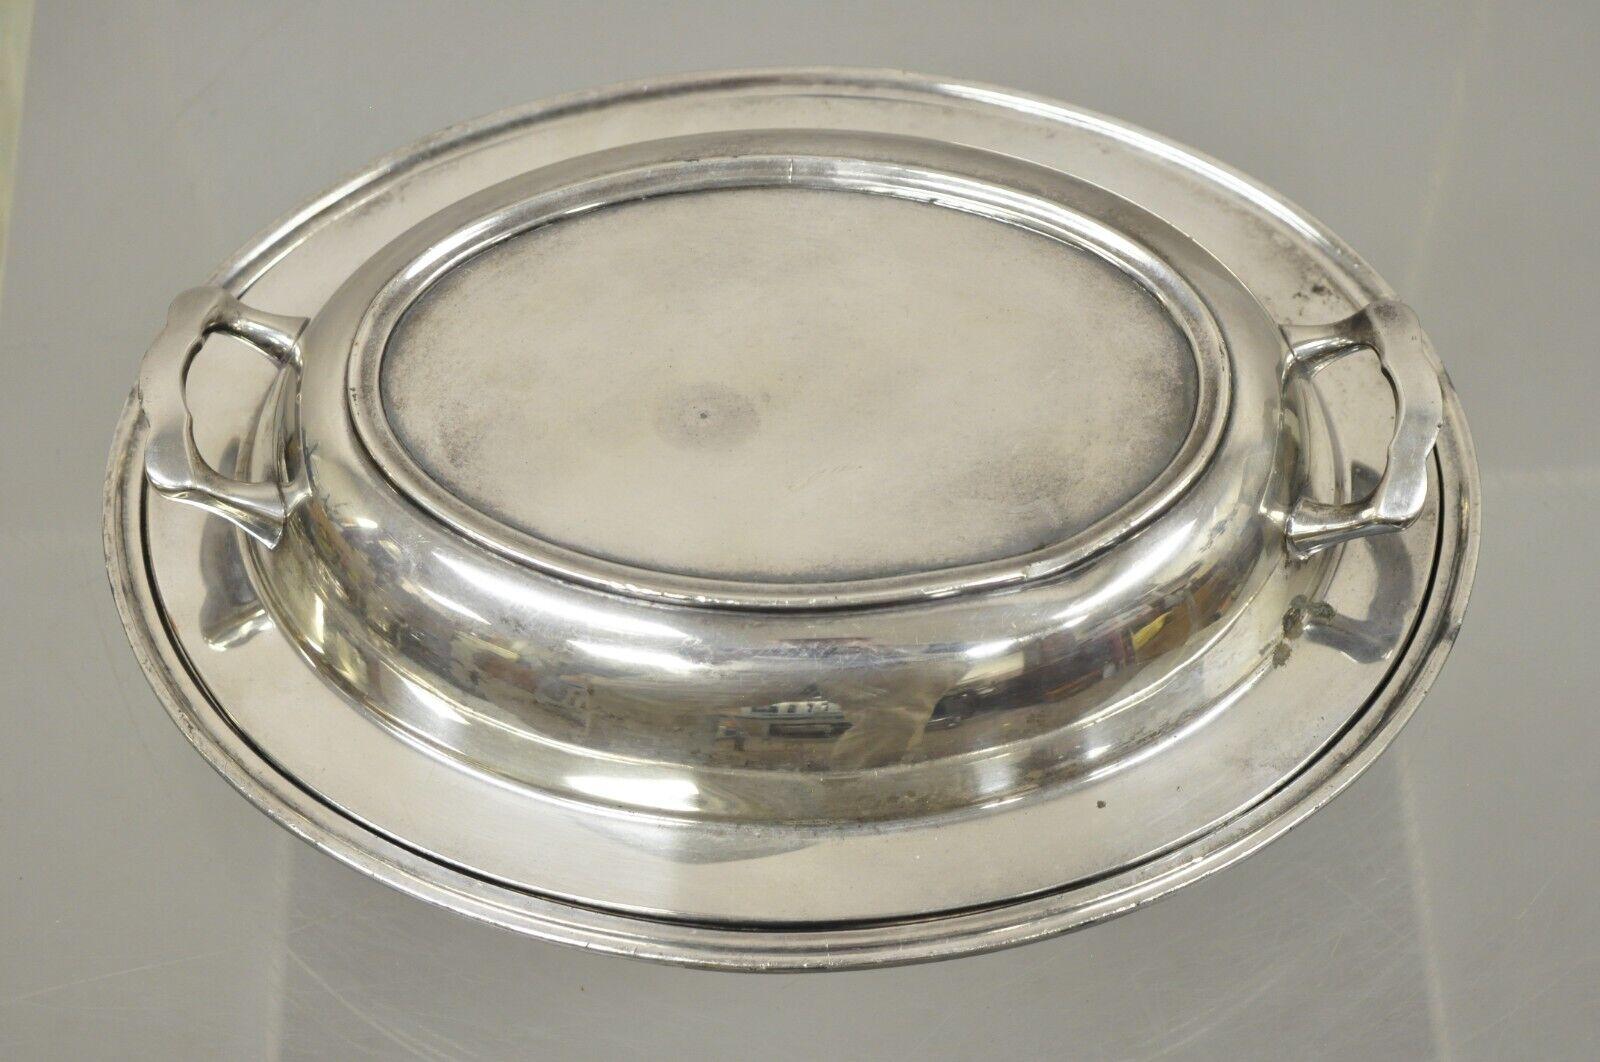 Vintage Cheshire S.P.C. 846 silver plated covered vegetable serving dish. Item features a covered dish with twin handle lid, oval shape, very nice vintage item. Circa early to mid 20th century. Measurements: 3.25